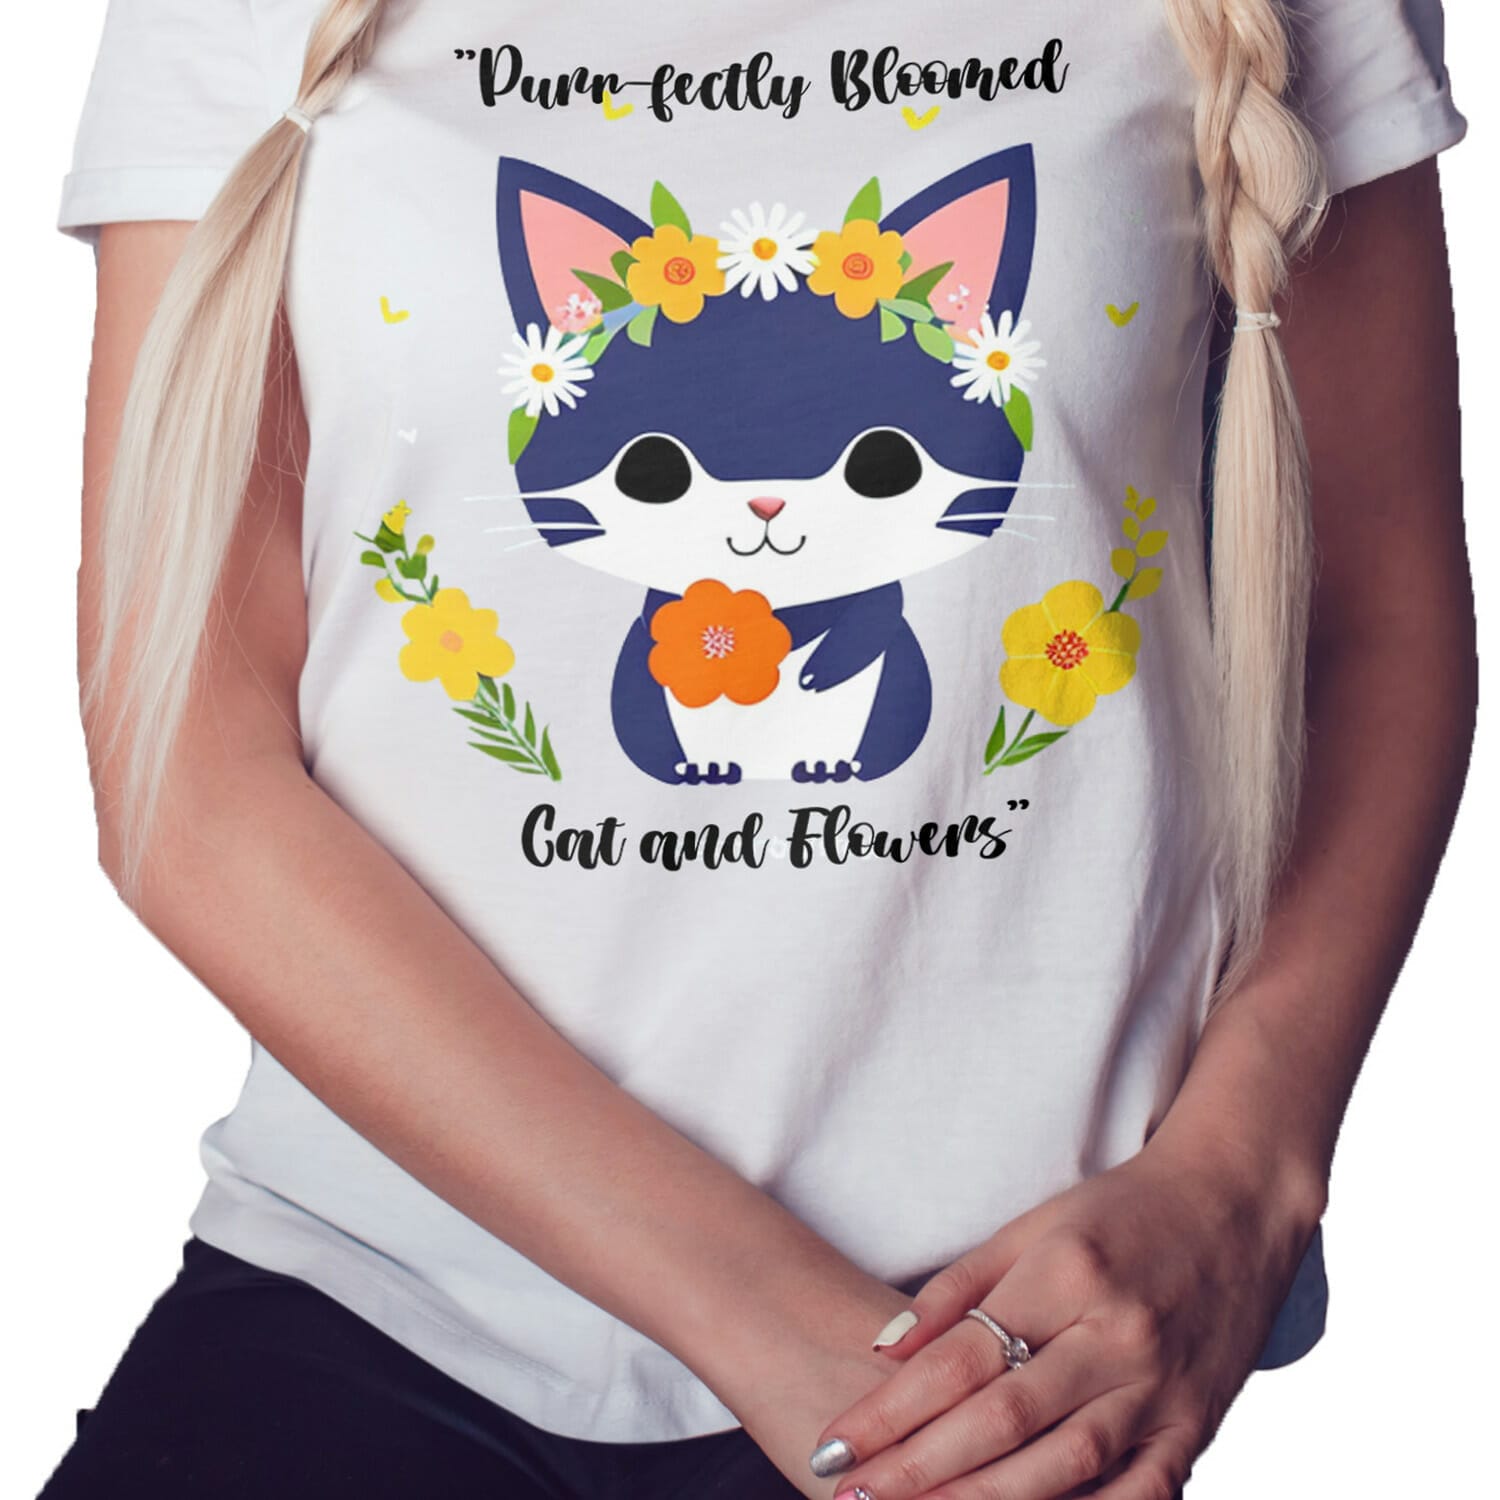 Cute Cat with flowers t-shirt design